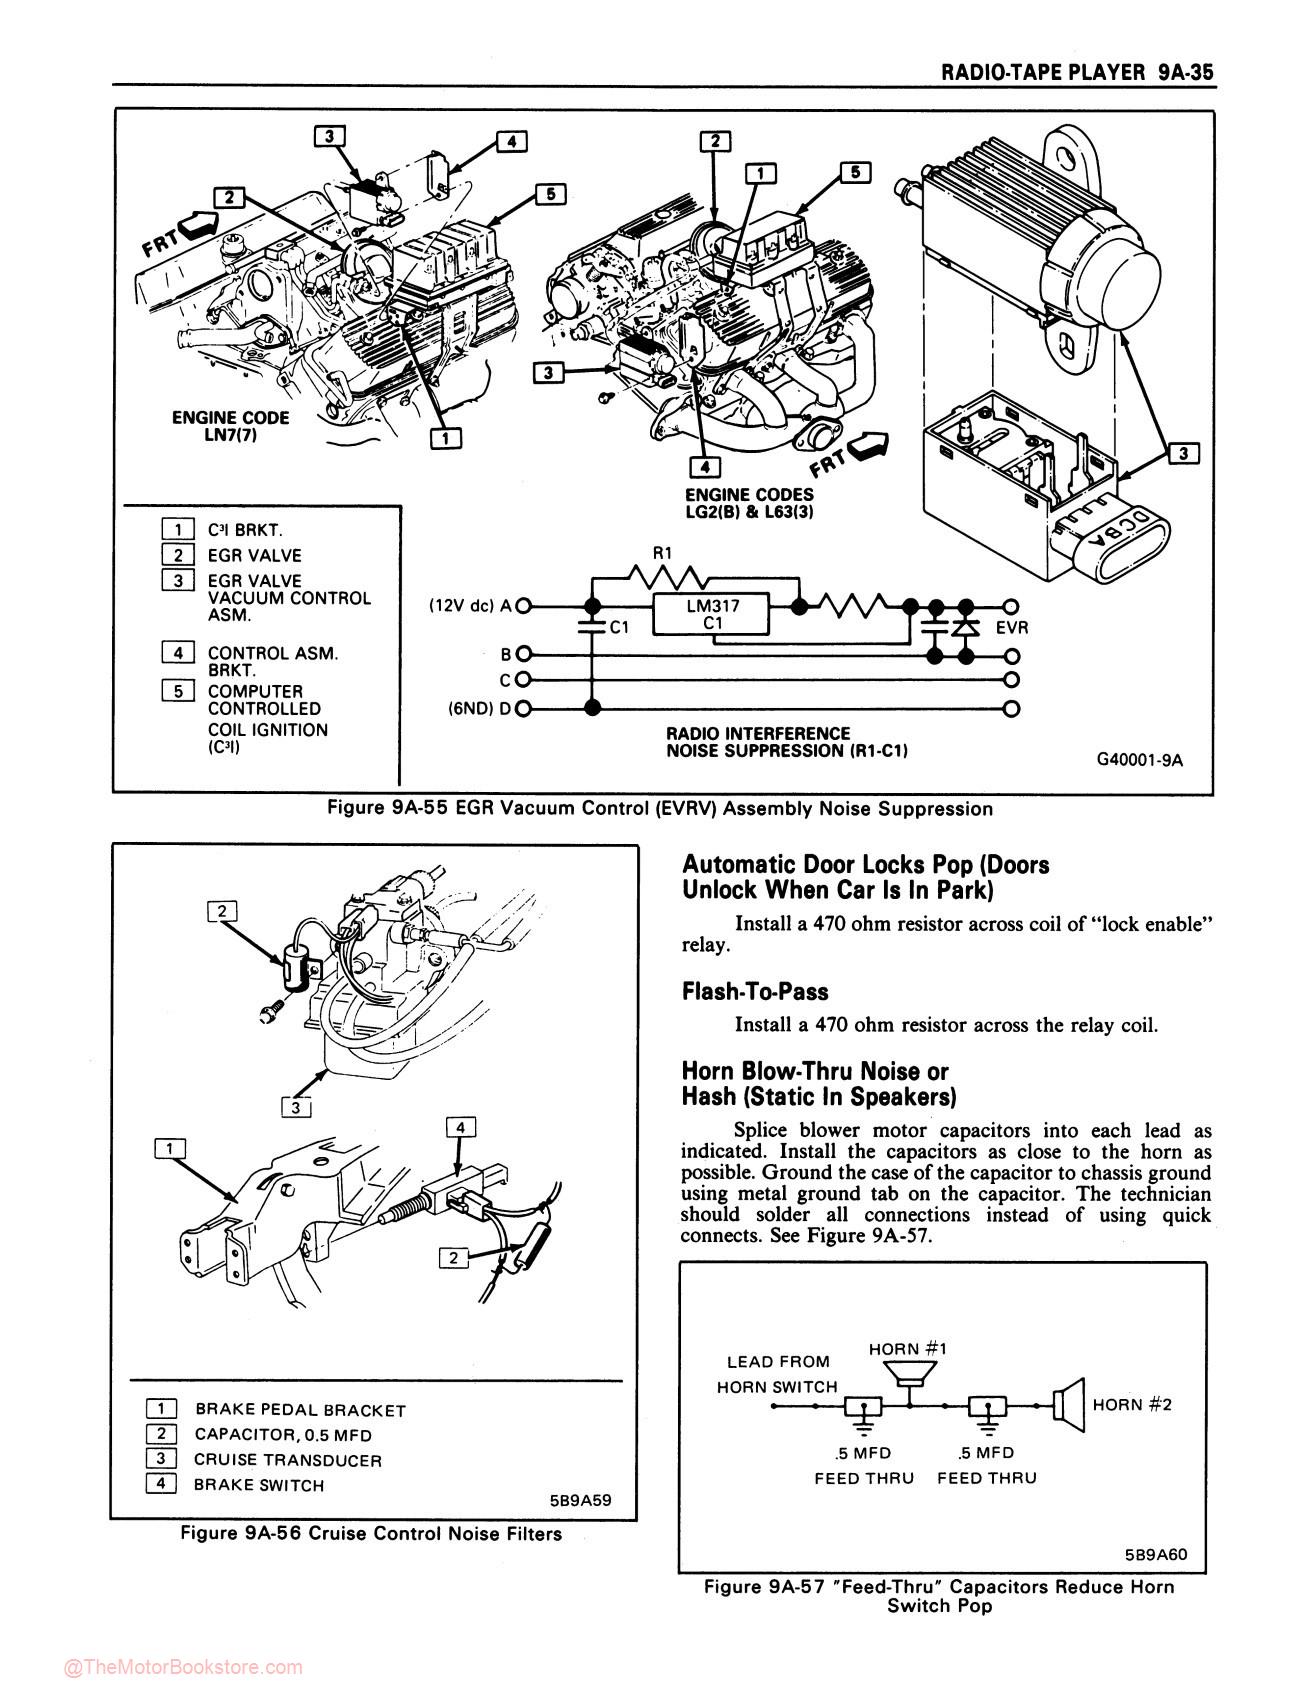 1987 Buick and Grand National Service Manual - Sample Page 7